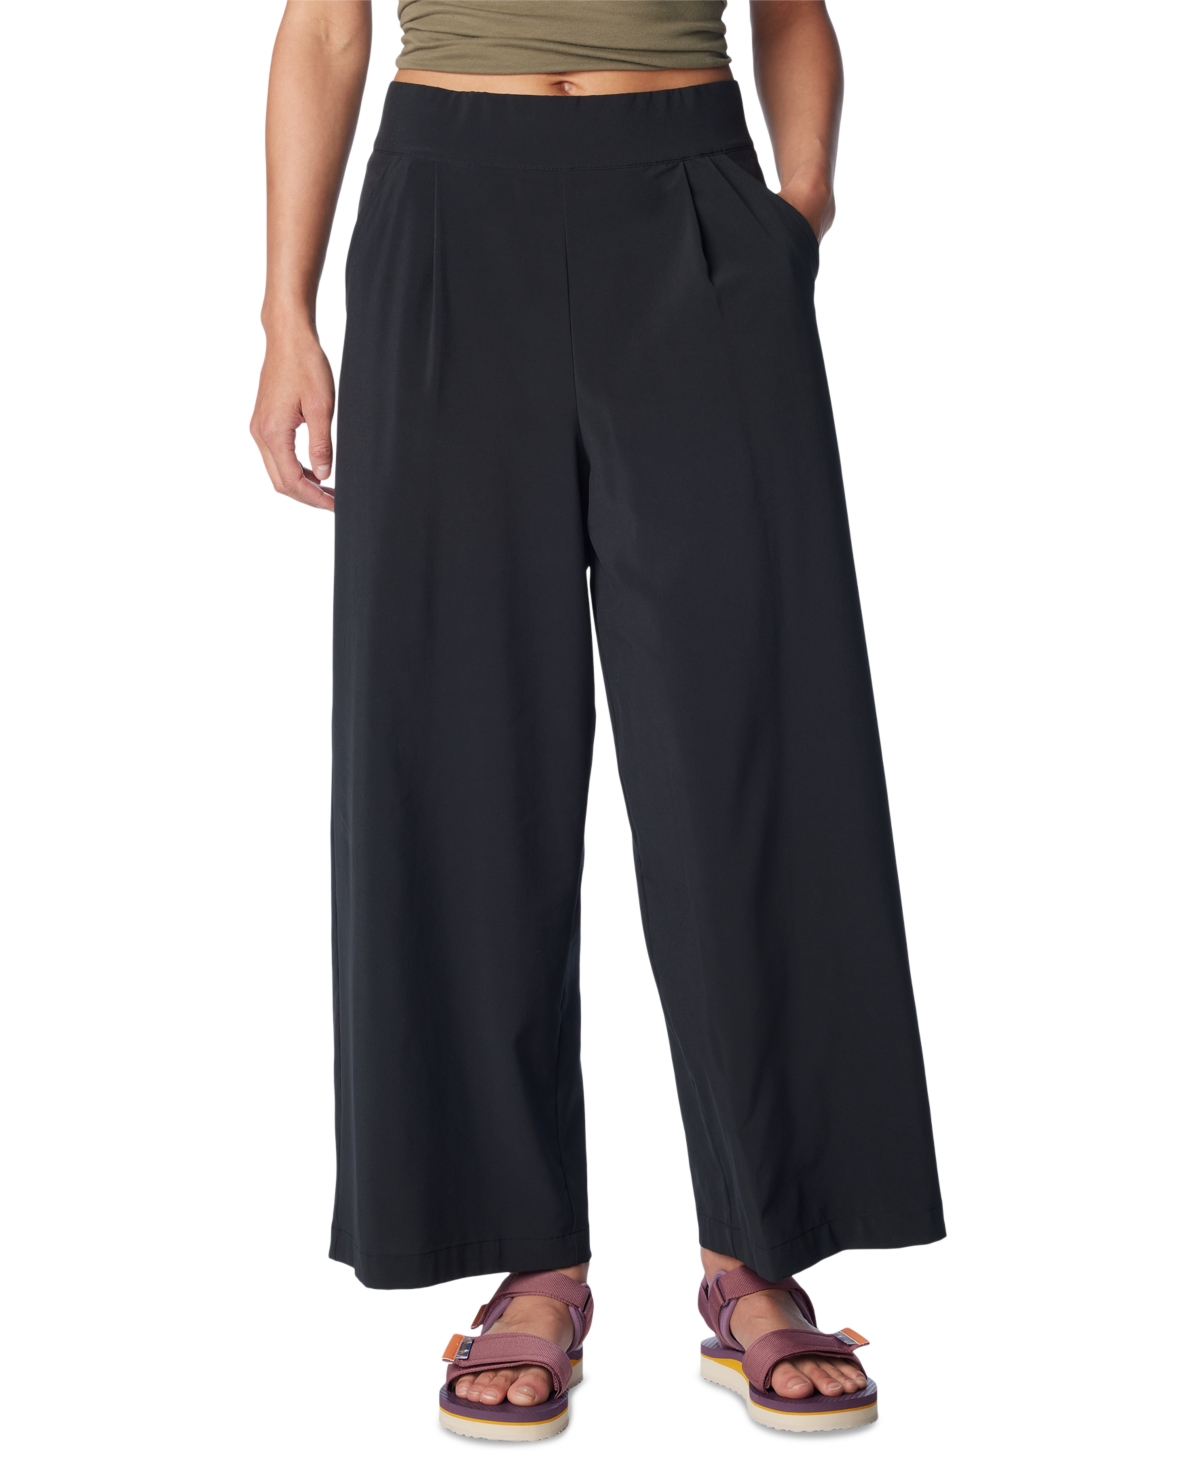 Women's Solid Anytime Wide-Leg Pull-On Pants - Dark Sapphire